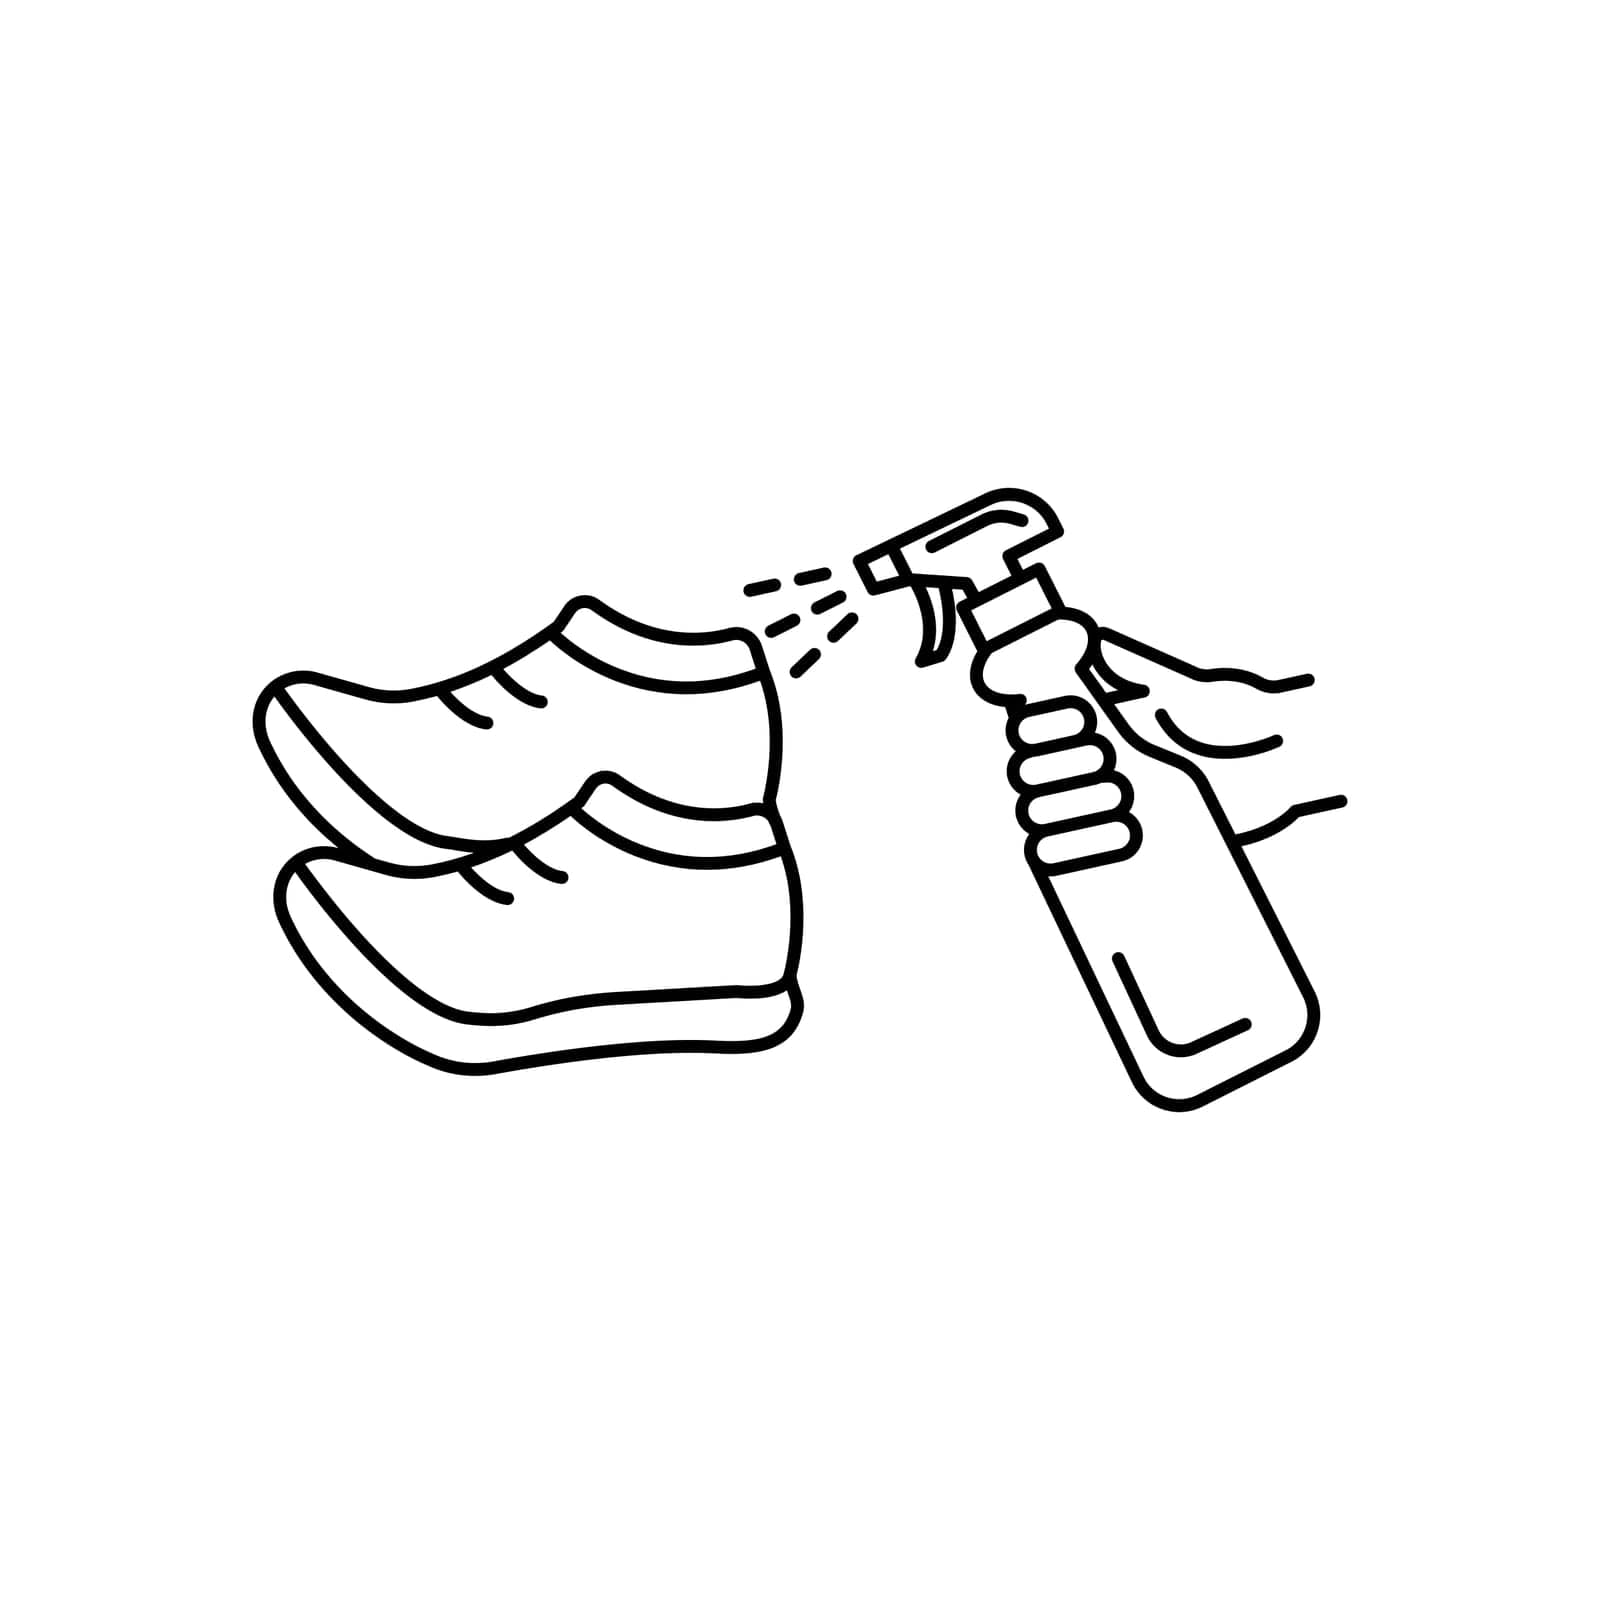 Cleaning disinfection, spray alcohol in shoes, coronavirus prevention sanitizer products line style icon vector illustration by Olgaufu